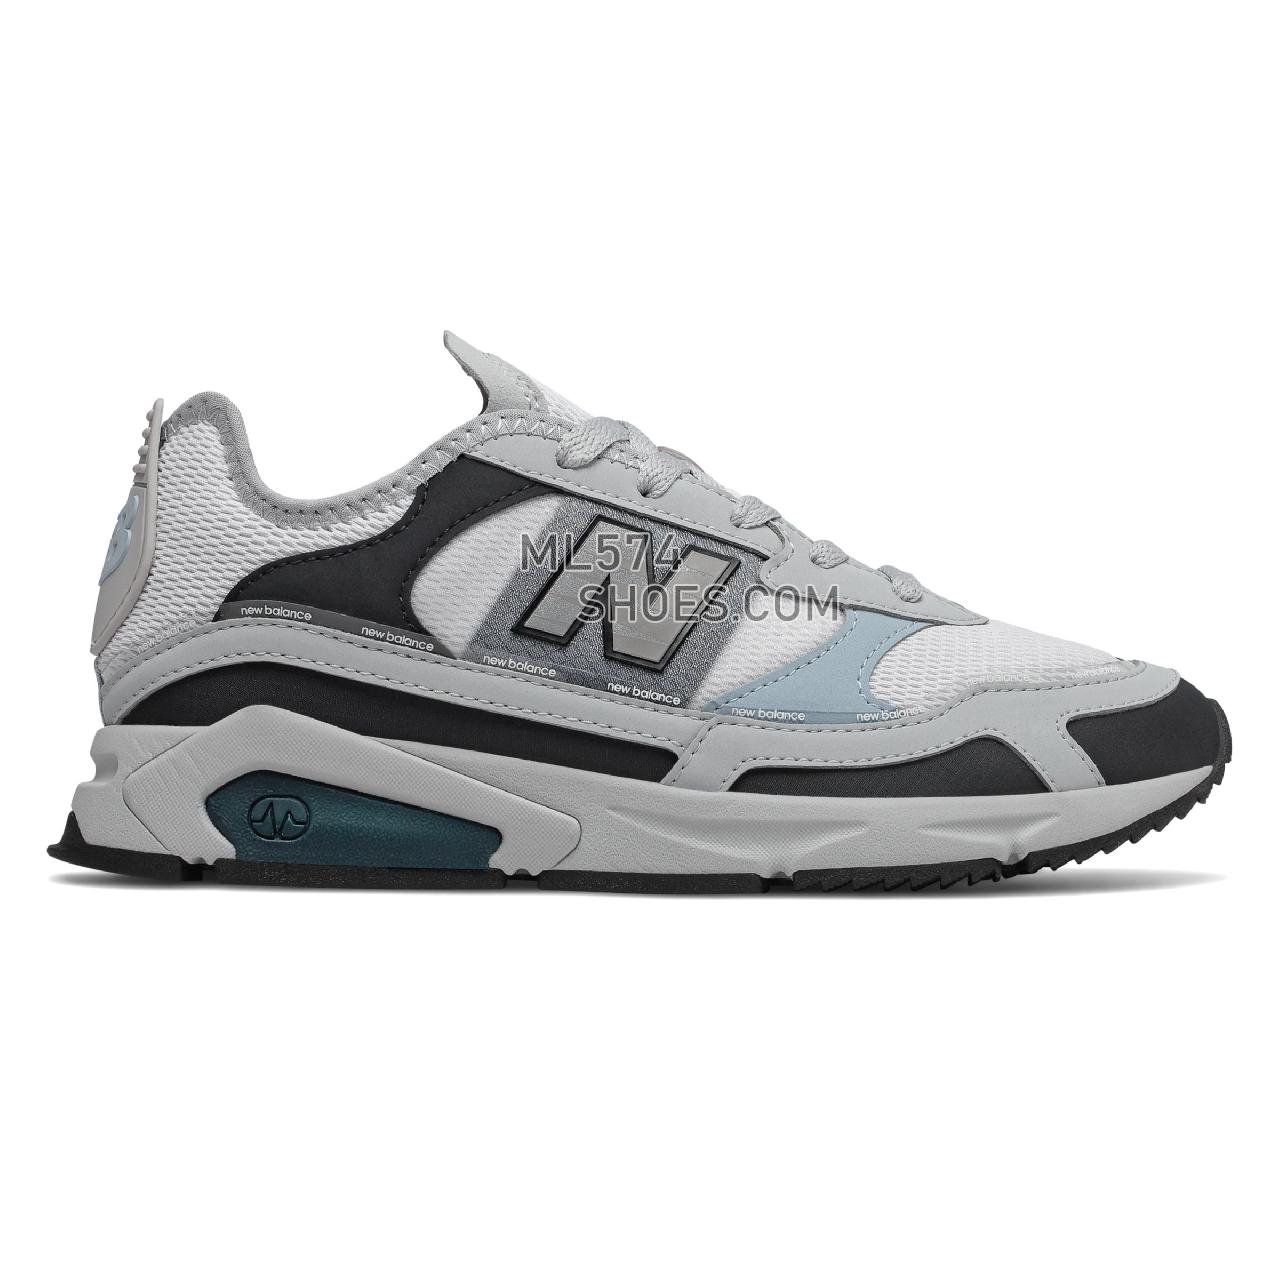 New Balance X-Racer - Women's Sport Style Sneakers - Light Aluminum with Supercell - WSXRCHFB